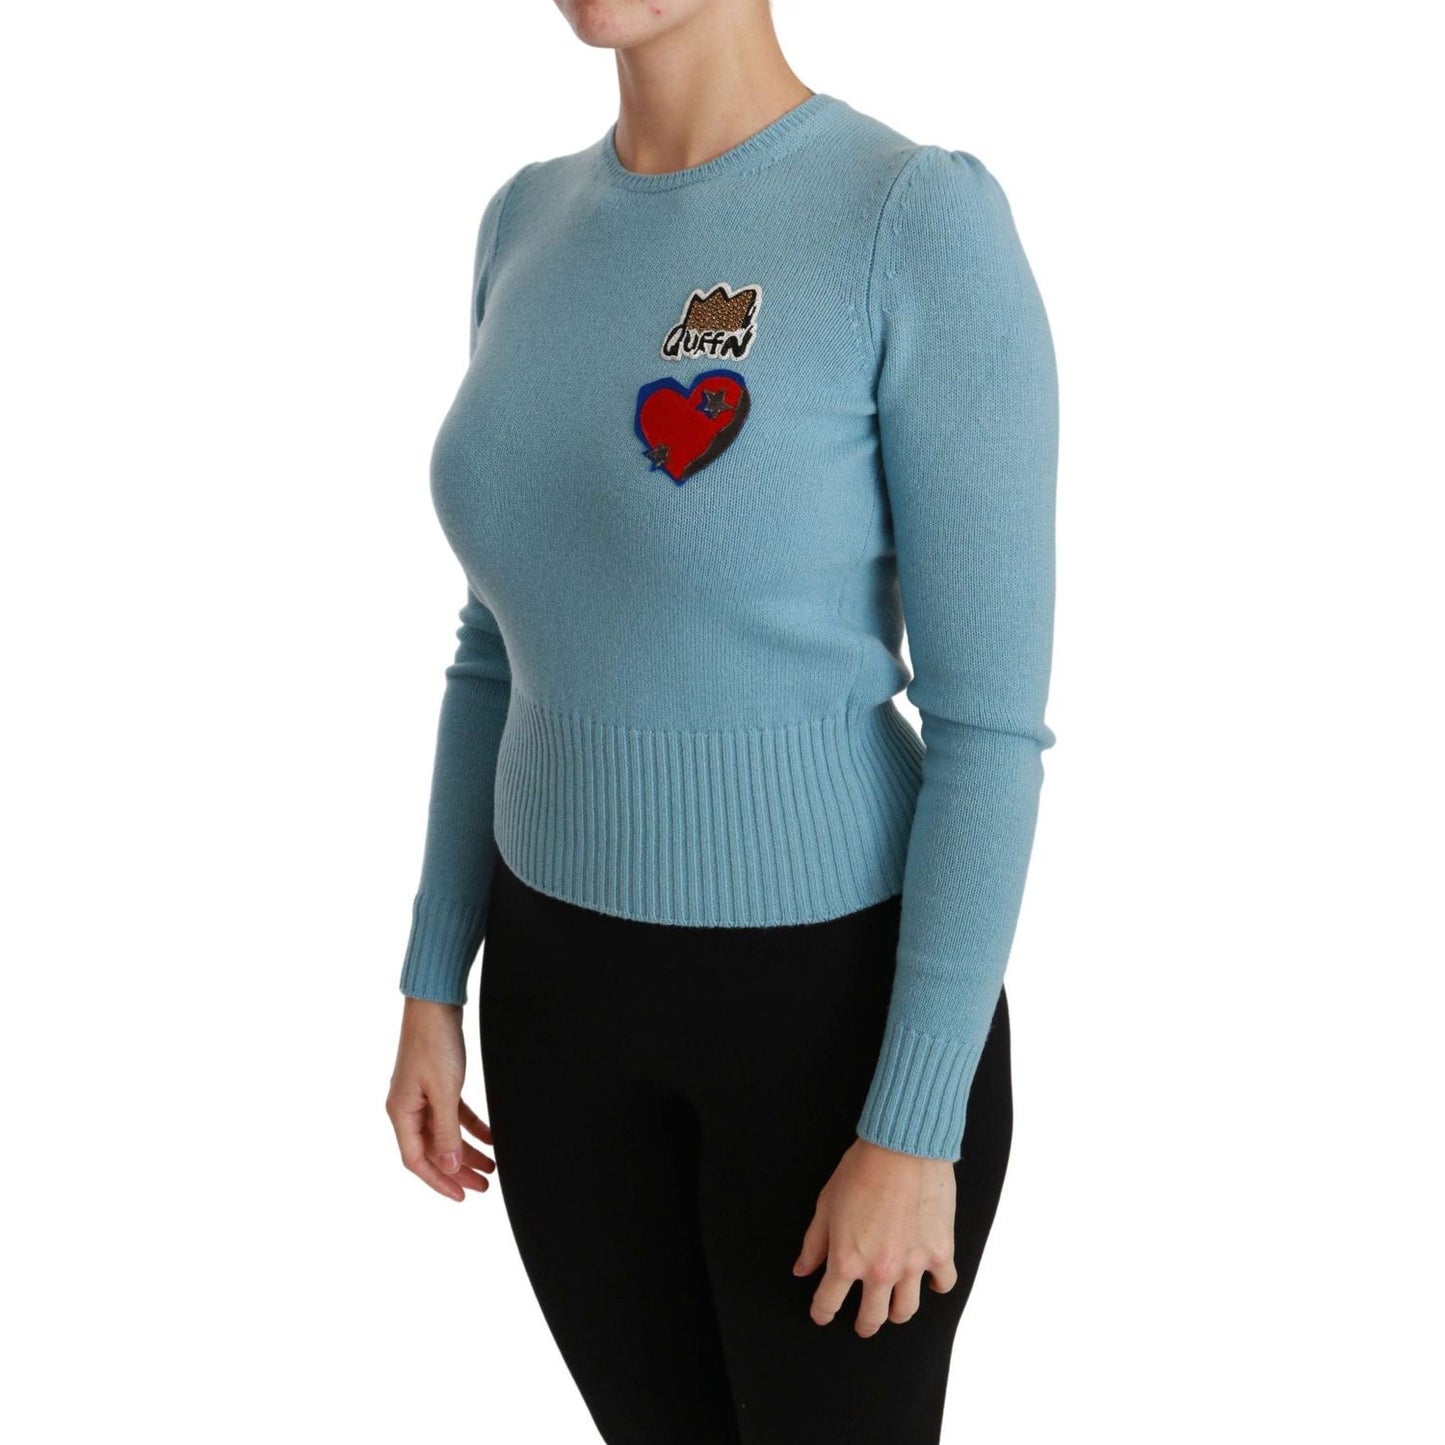 Dolce & Gabbana Queen Heart Beaded Wool Sweater blue-wool-queen-heart-pullover-sweater WOMAN TOPS AND SHIRTS IMG_7178-scaled-8998d103-a00.jpg